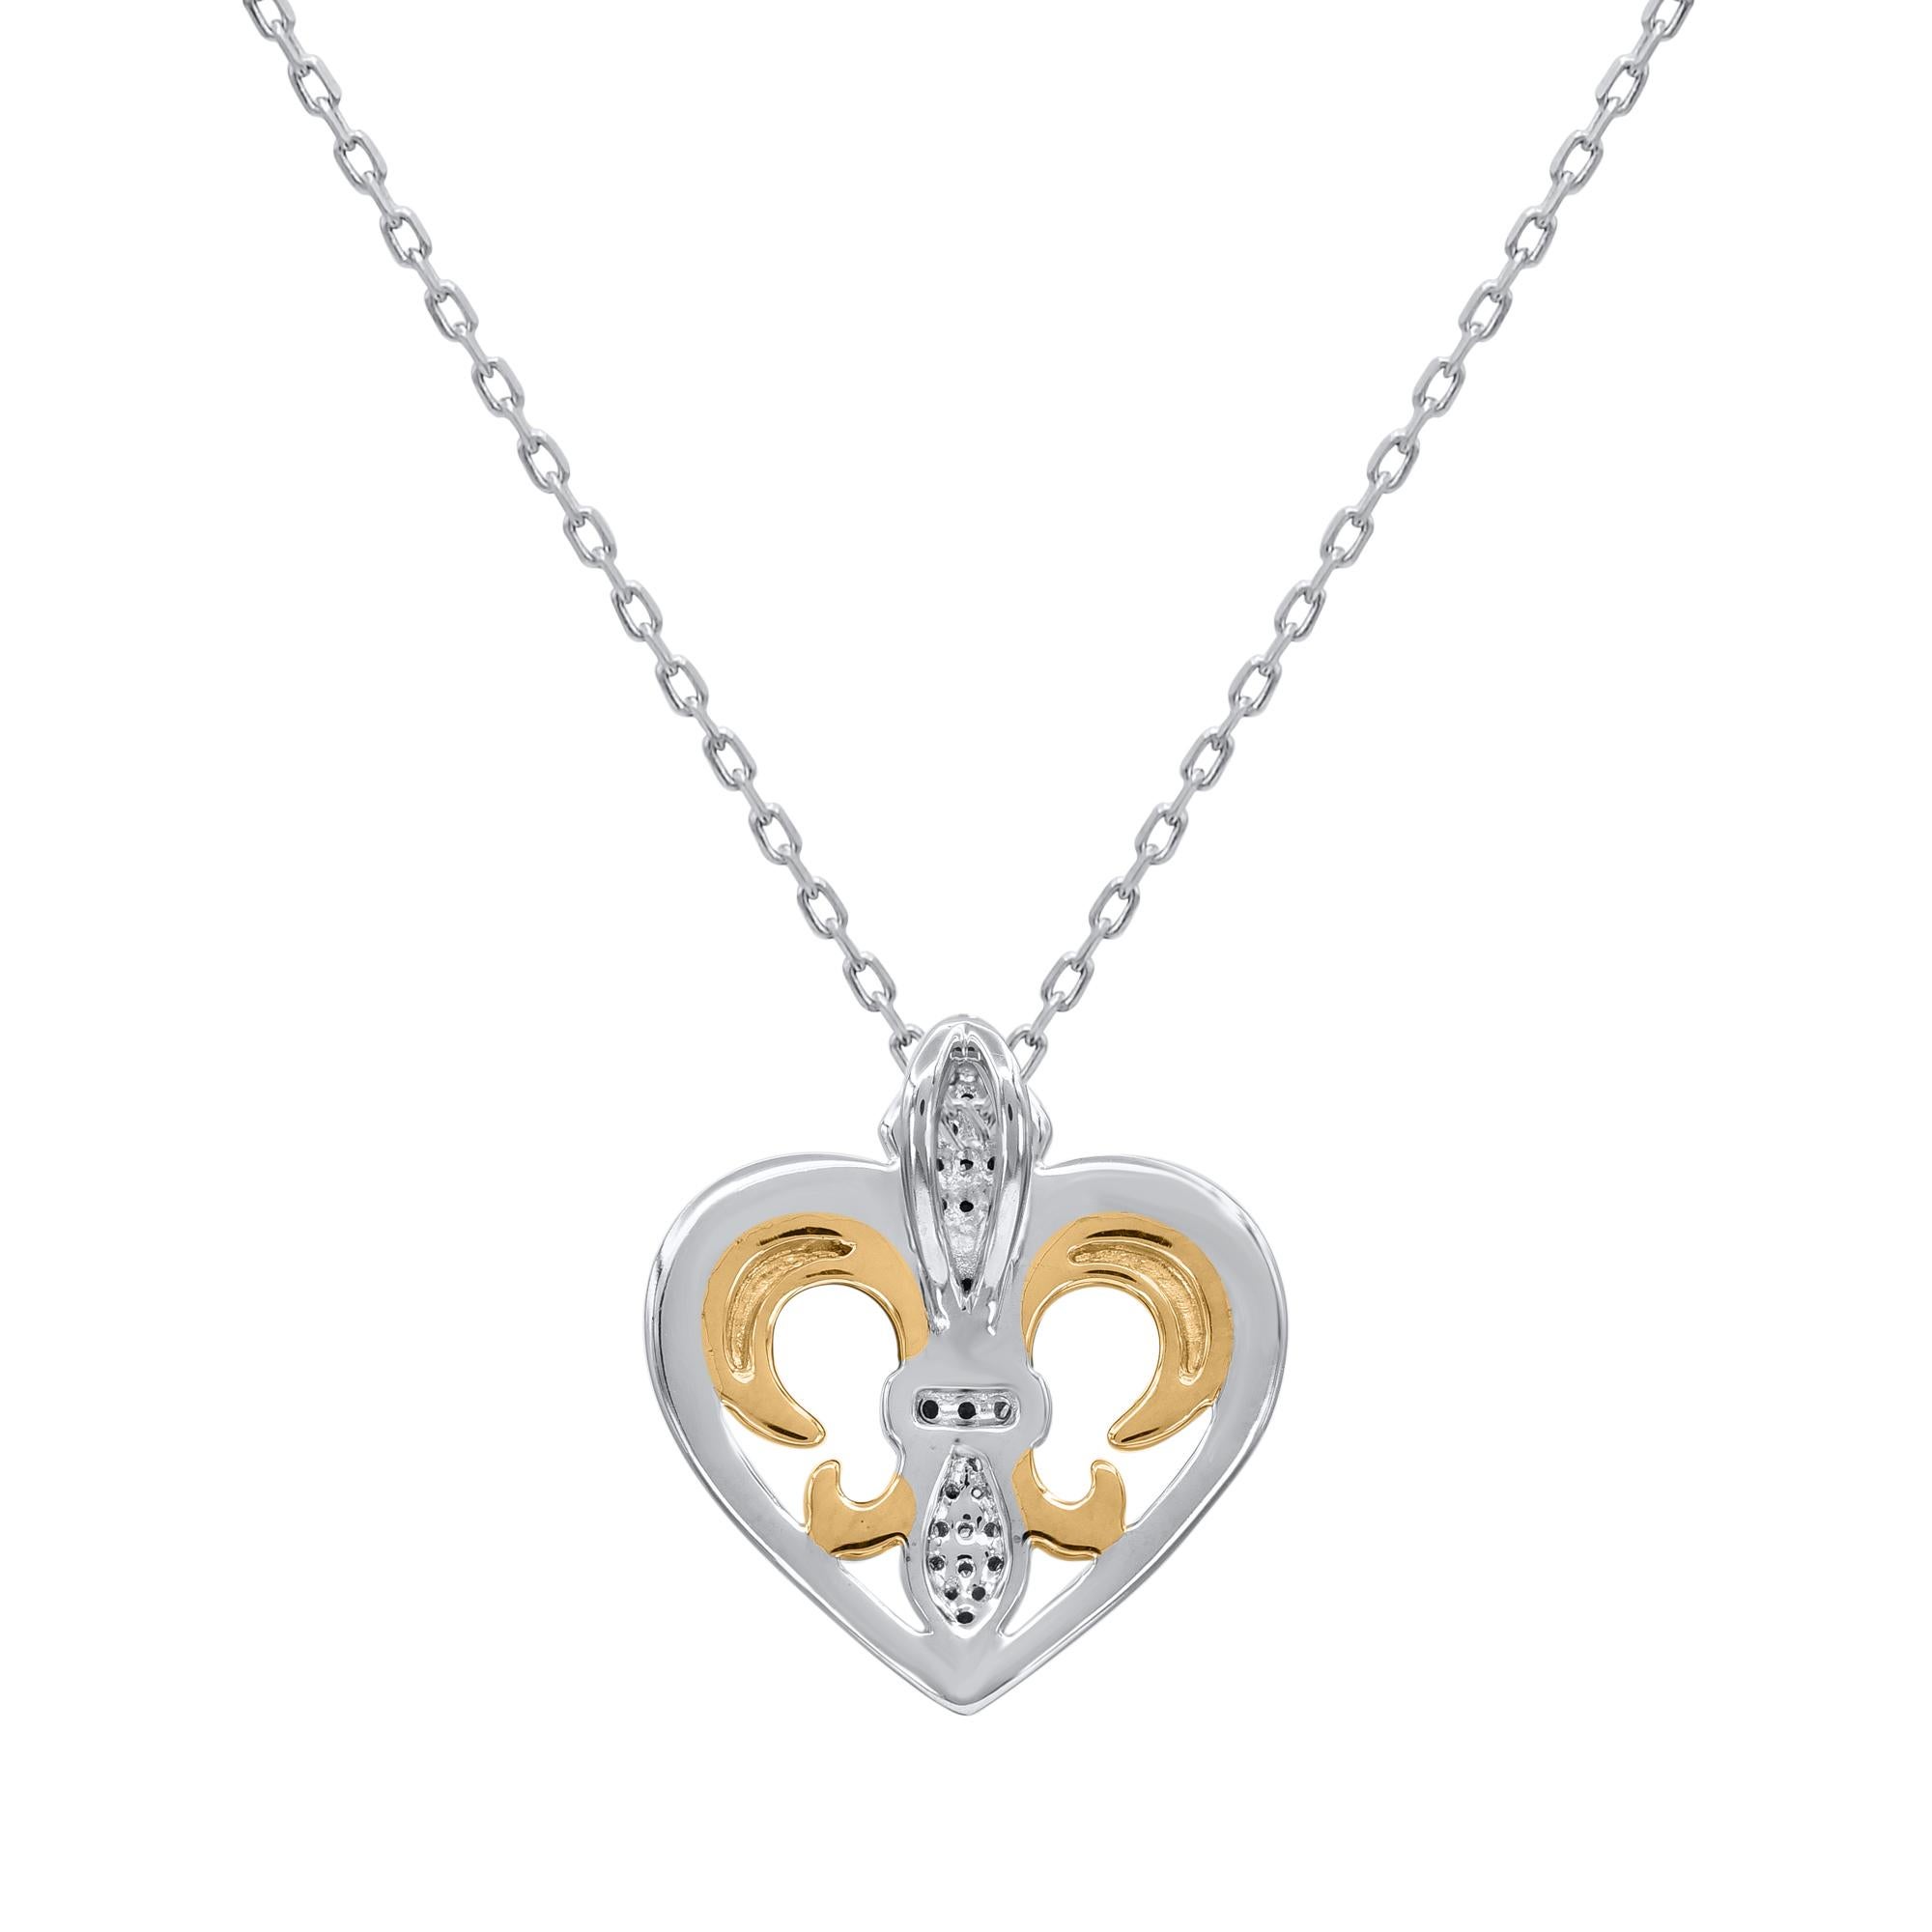 A dazzling look for a day or evening, this heart pendant makes a brilliant addition to her wardrobe. These pendants are studded with 34 single cut natural diamonds in pave and prongs setting. and pendant crafted in 18 karat two tone gold. Diamonds